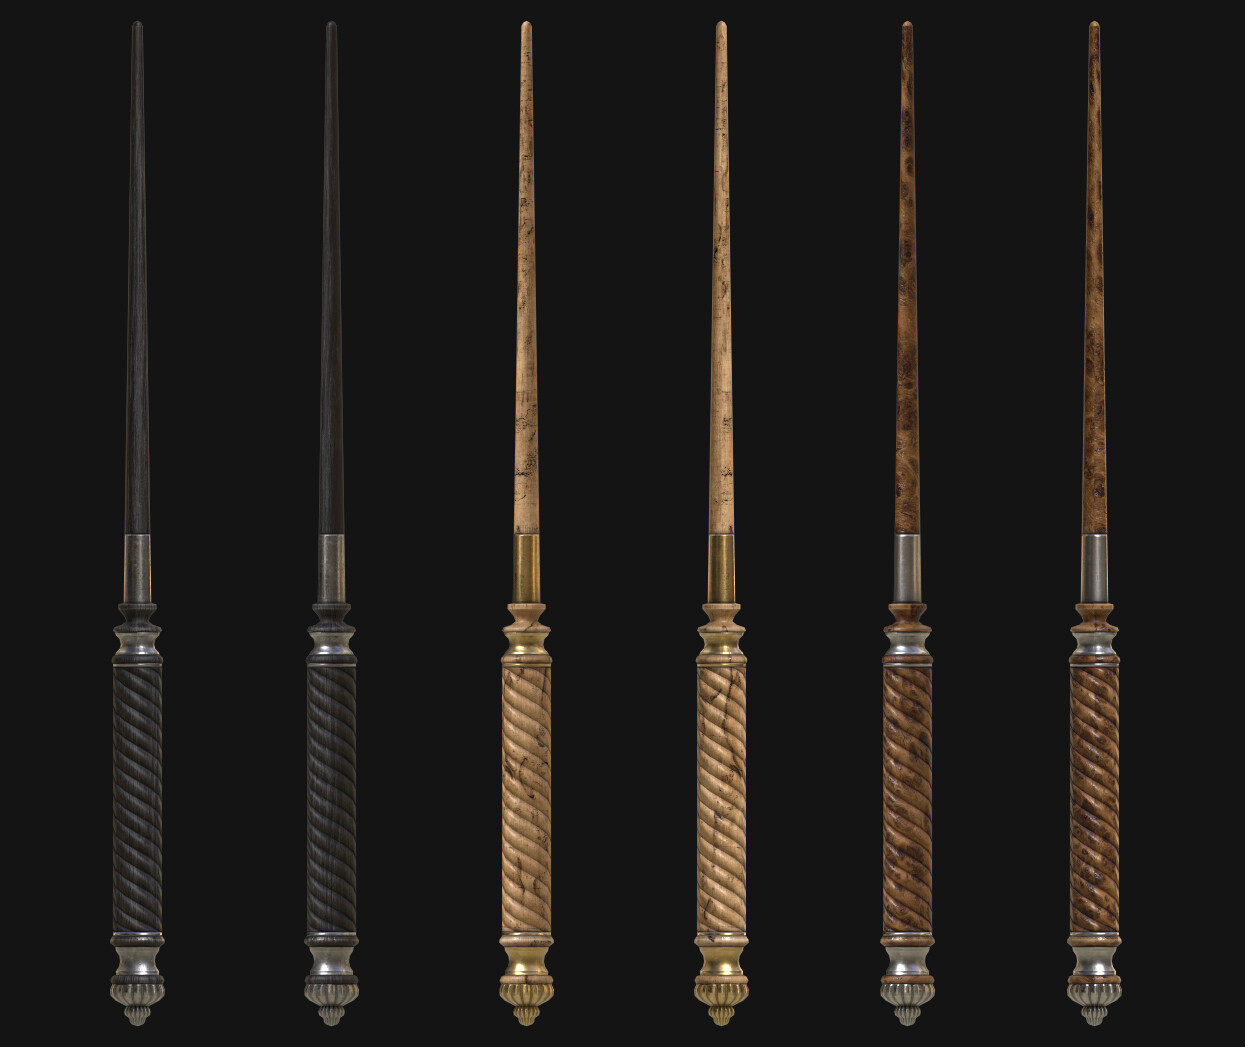 Professor Sharp's Wand and variations. 